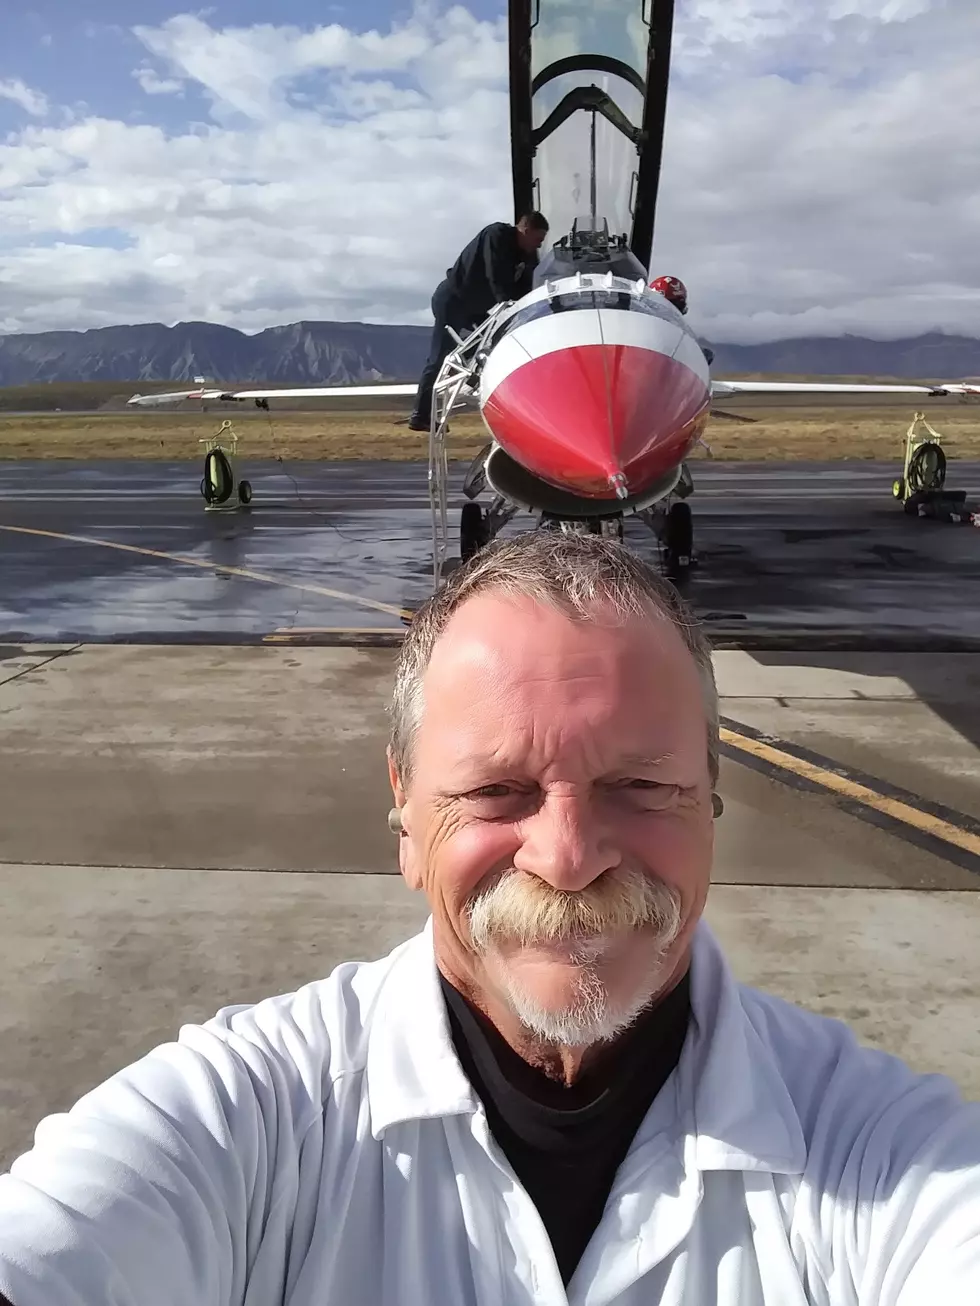 Behind The Scenes At The Grand Junction Air Show